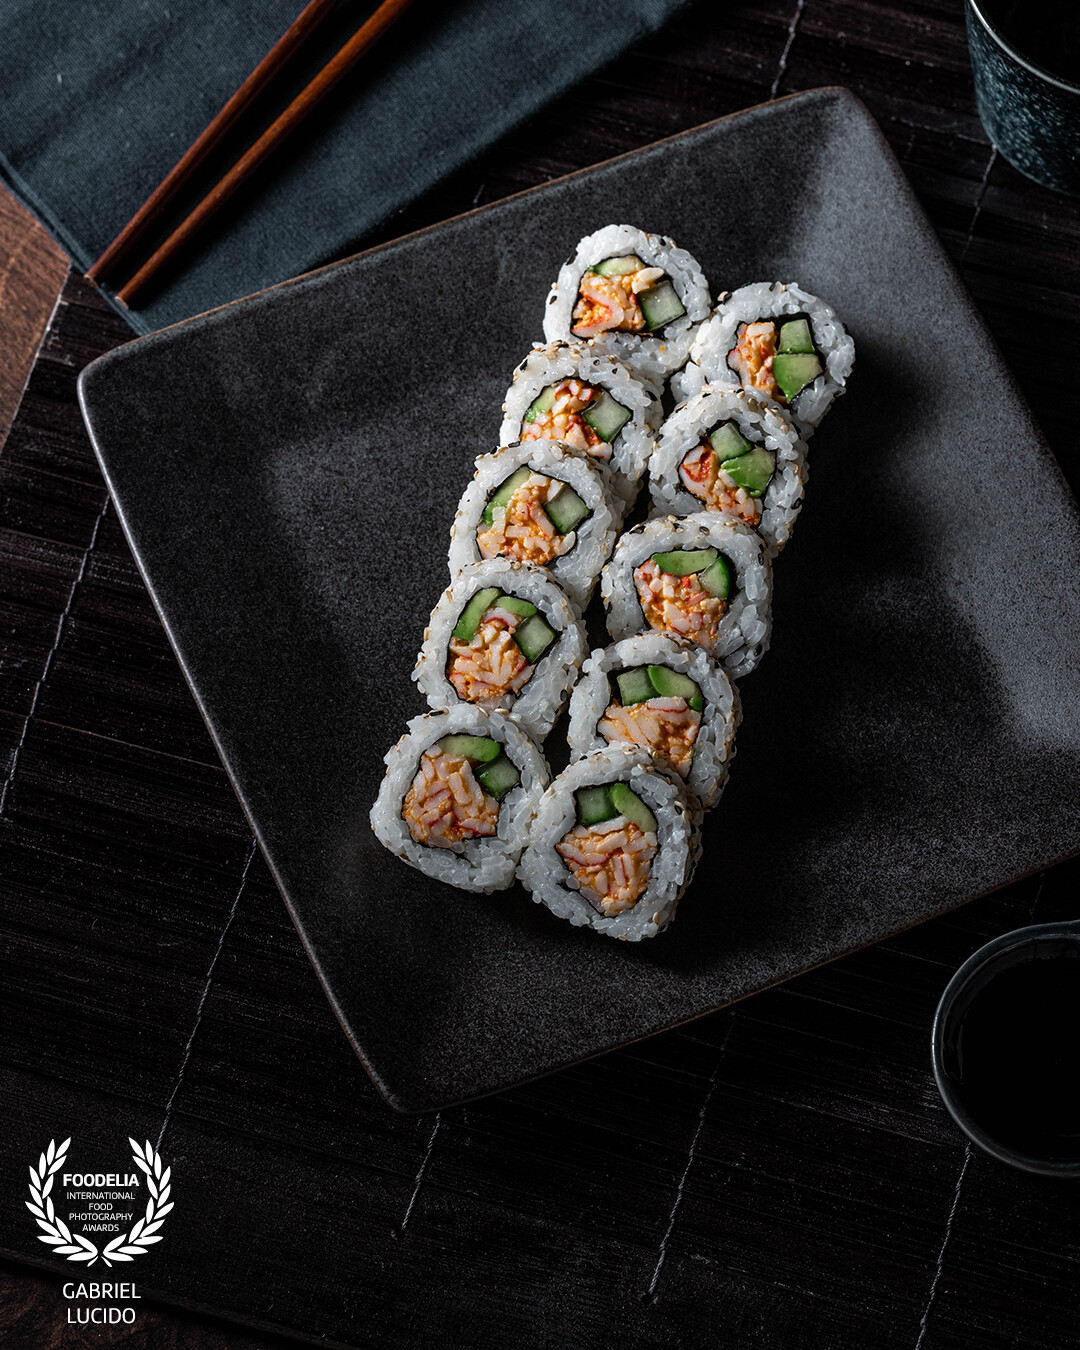 This sushi was Food Styled by Elizabeth Normoyle. This photo was taken using soft light which was blocked off at the top and bottom of the frame to achieve a natural vignetting effect.